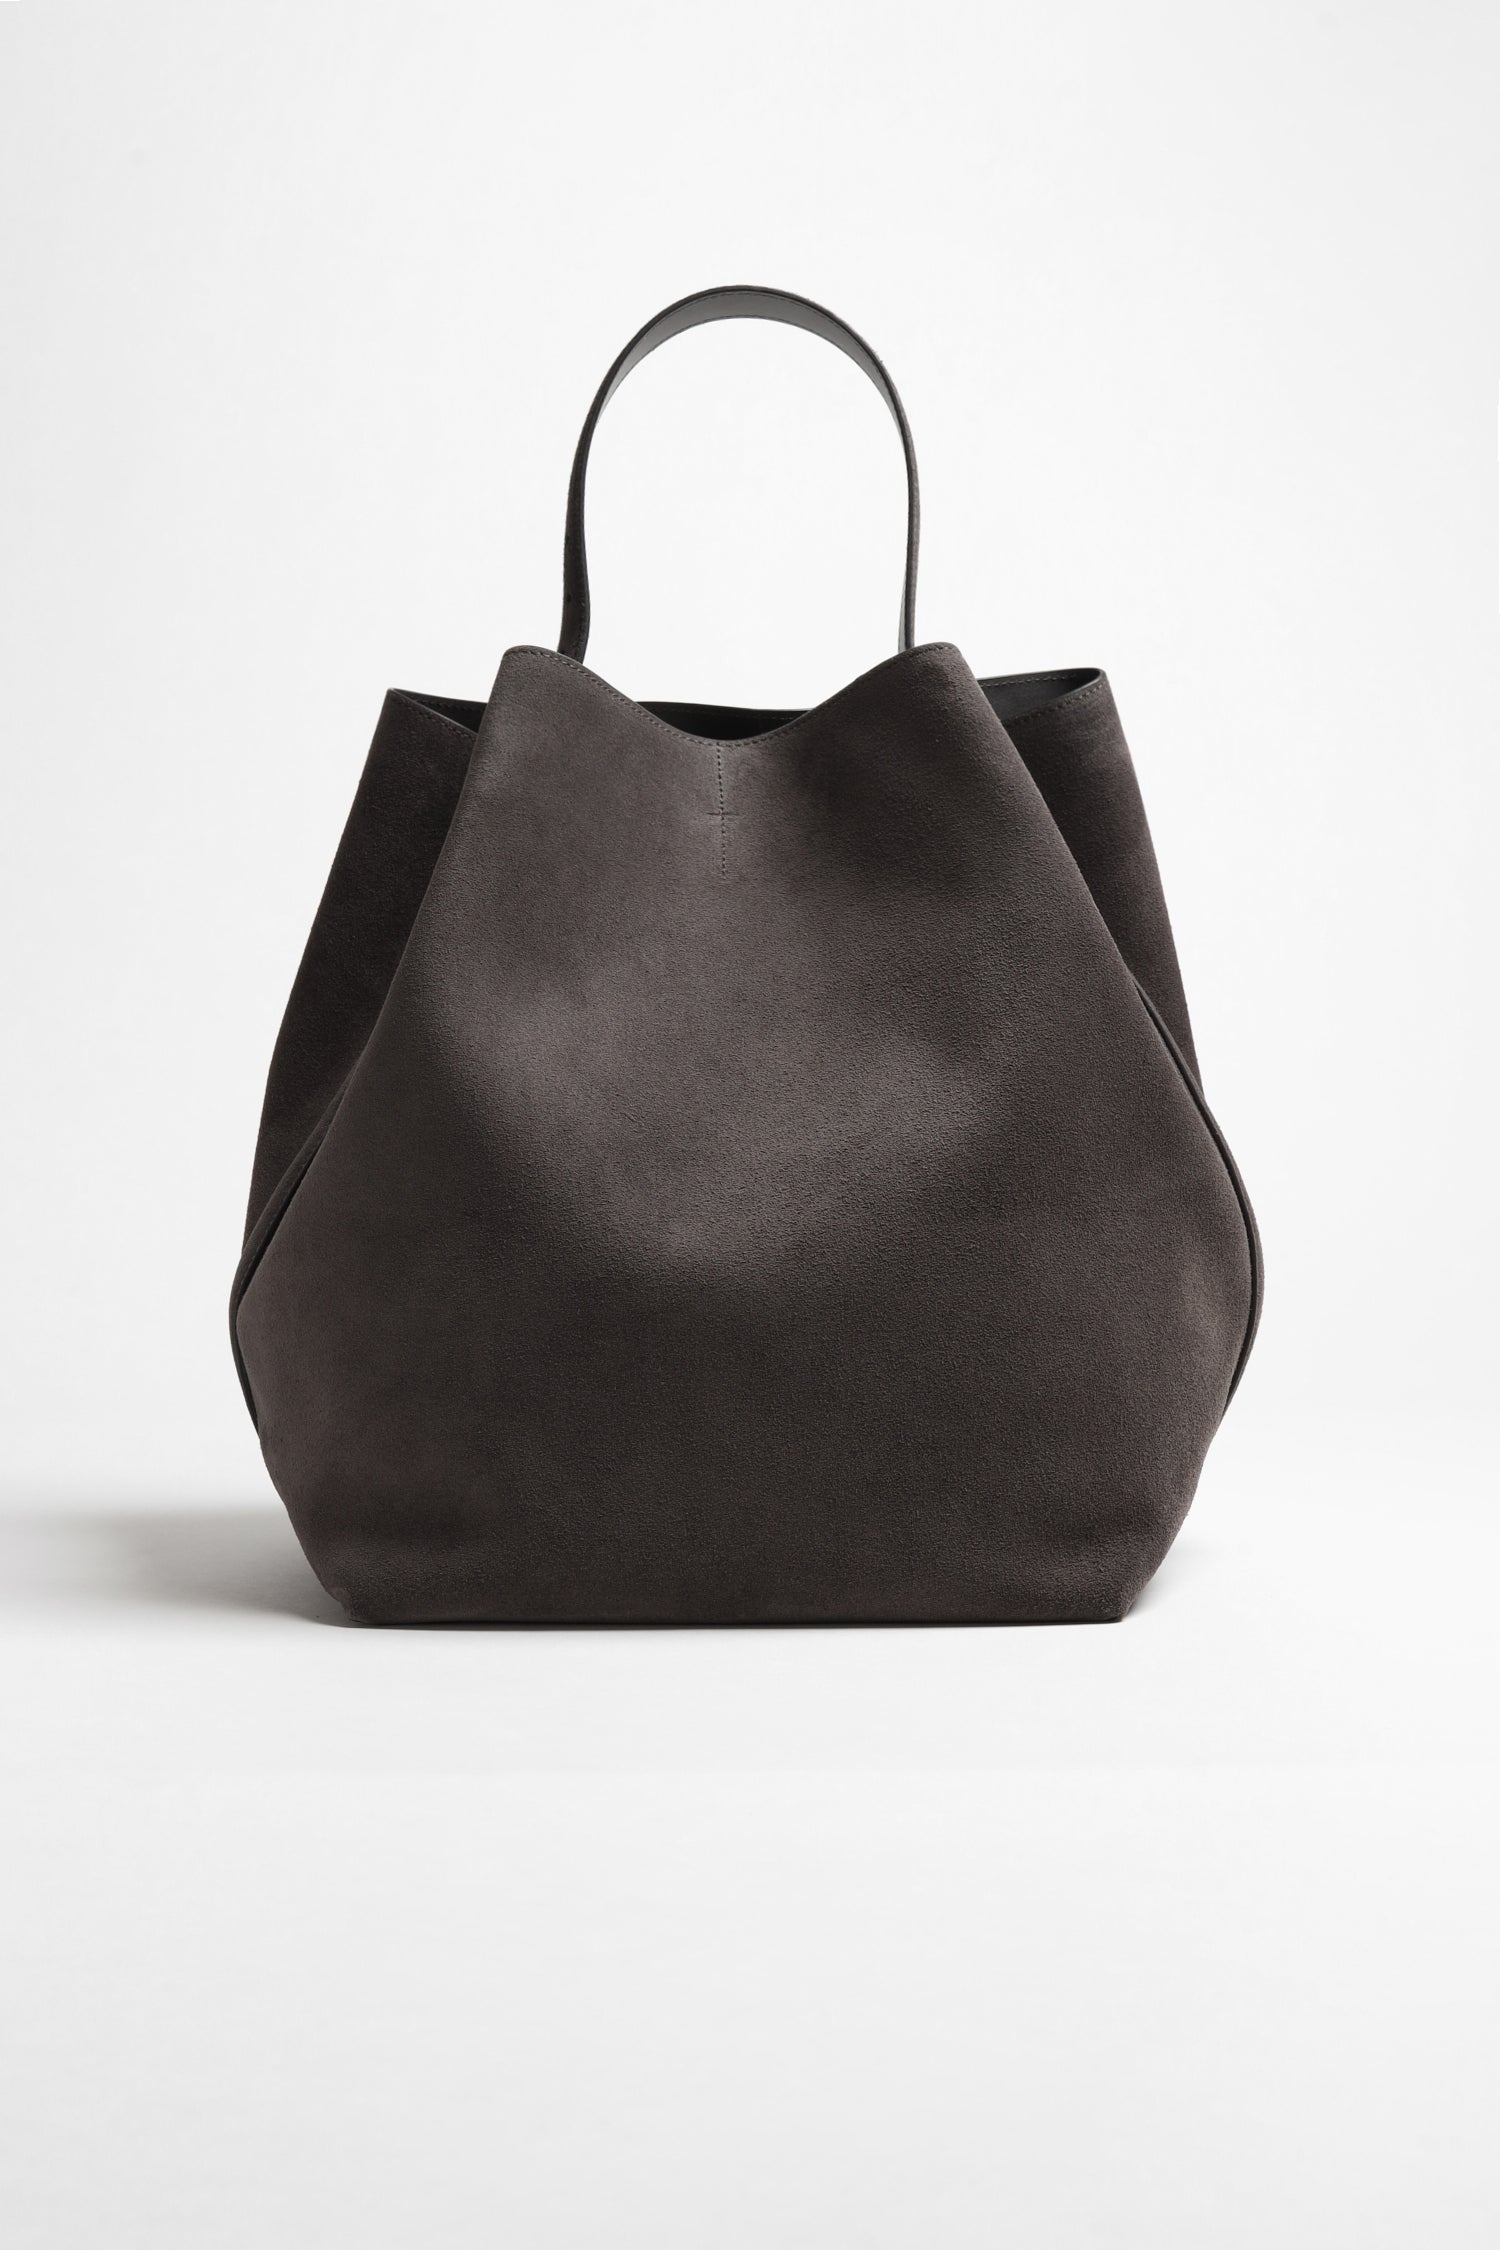 tasche-belted-suede-in-granite-anitahass